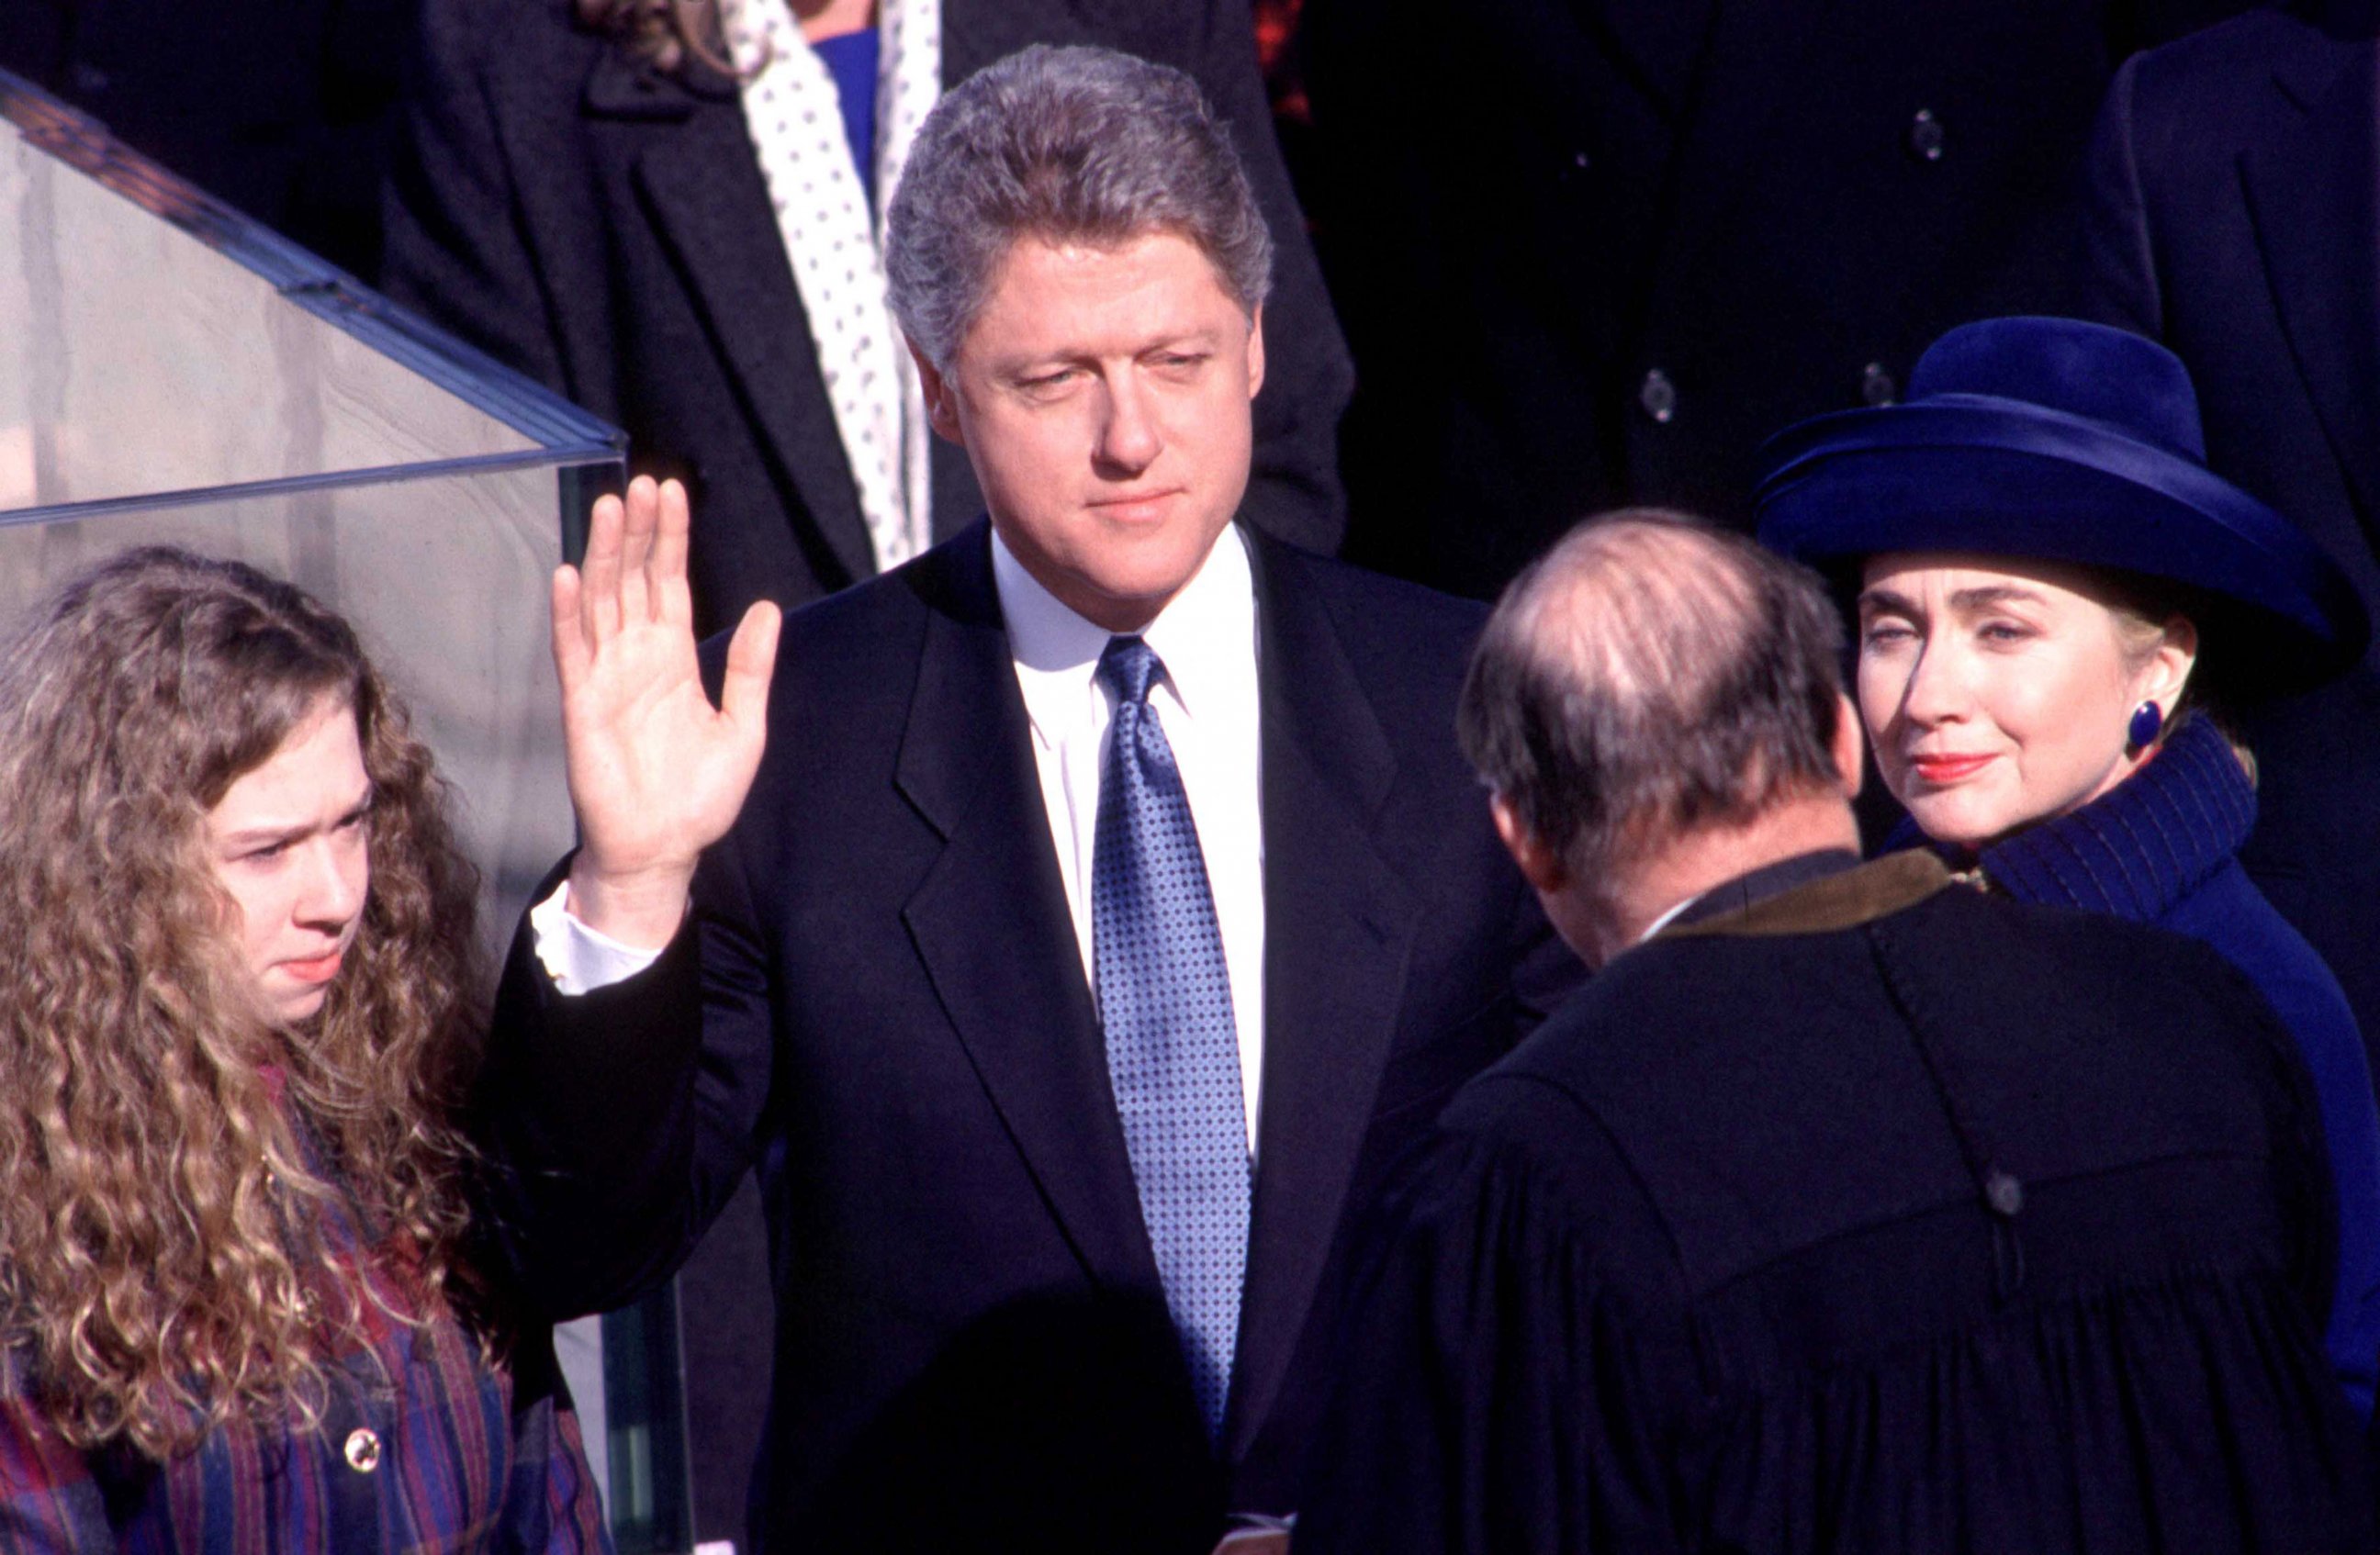 PHOTO: Chelsea Clinton joined her parents, President Bill Clinton and First Lady Hillary Rodham Clinton as he took the oath of office, January 1993.